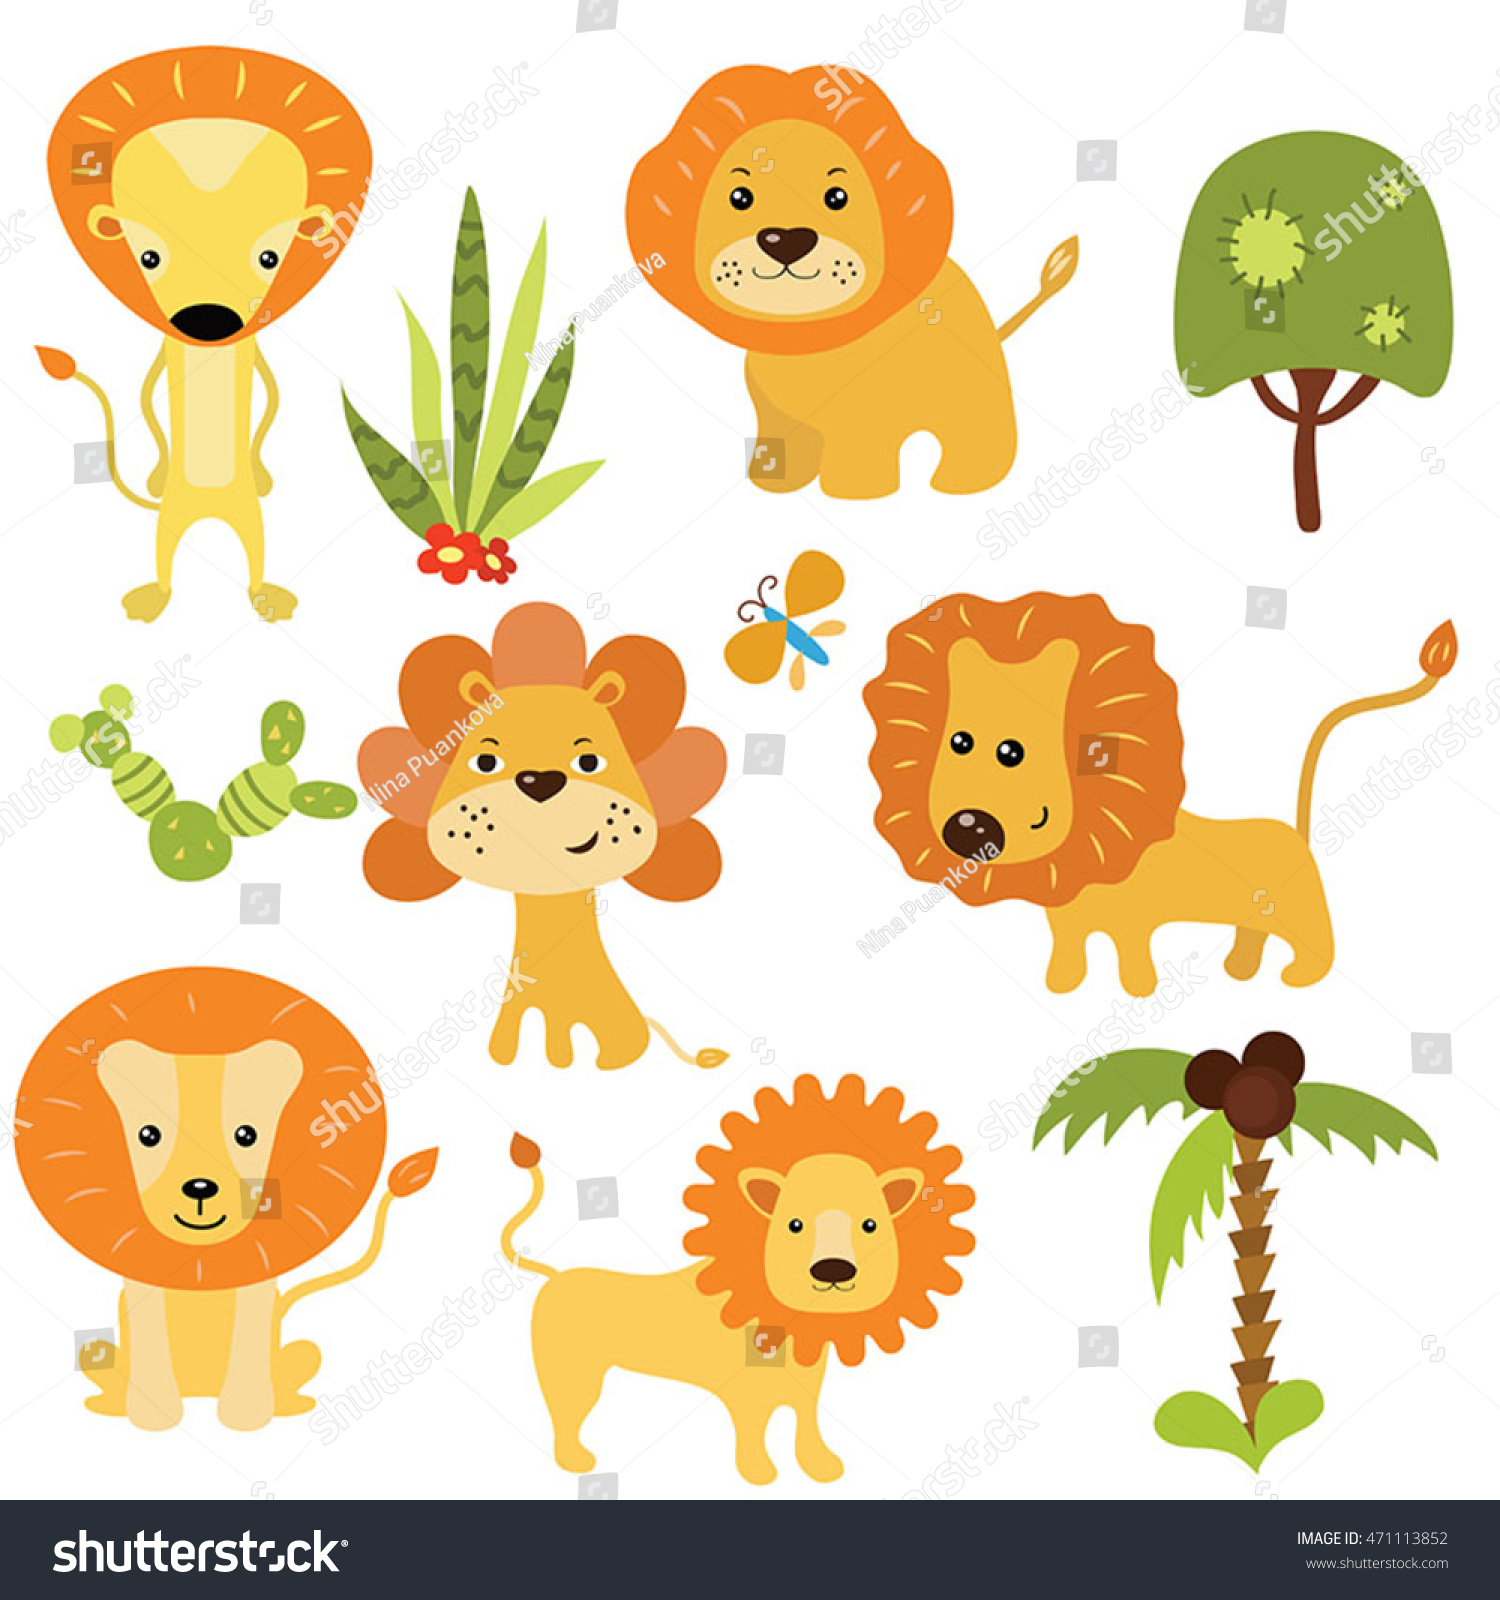 Set Of Different Lions On White Background. Stock Vector Illustration ...